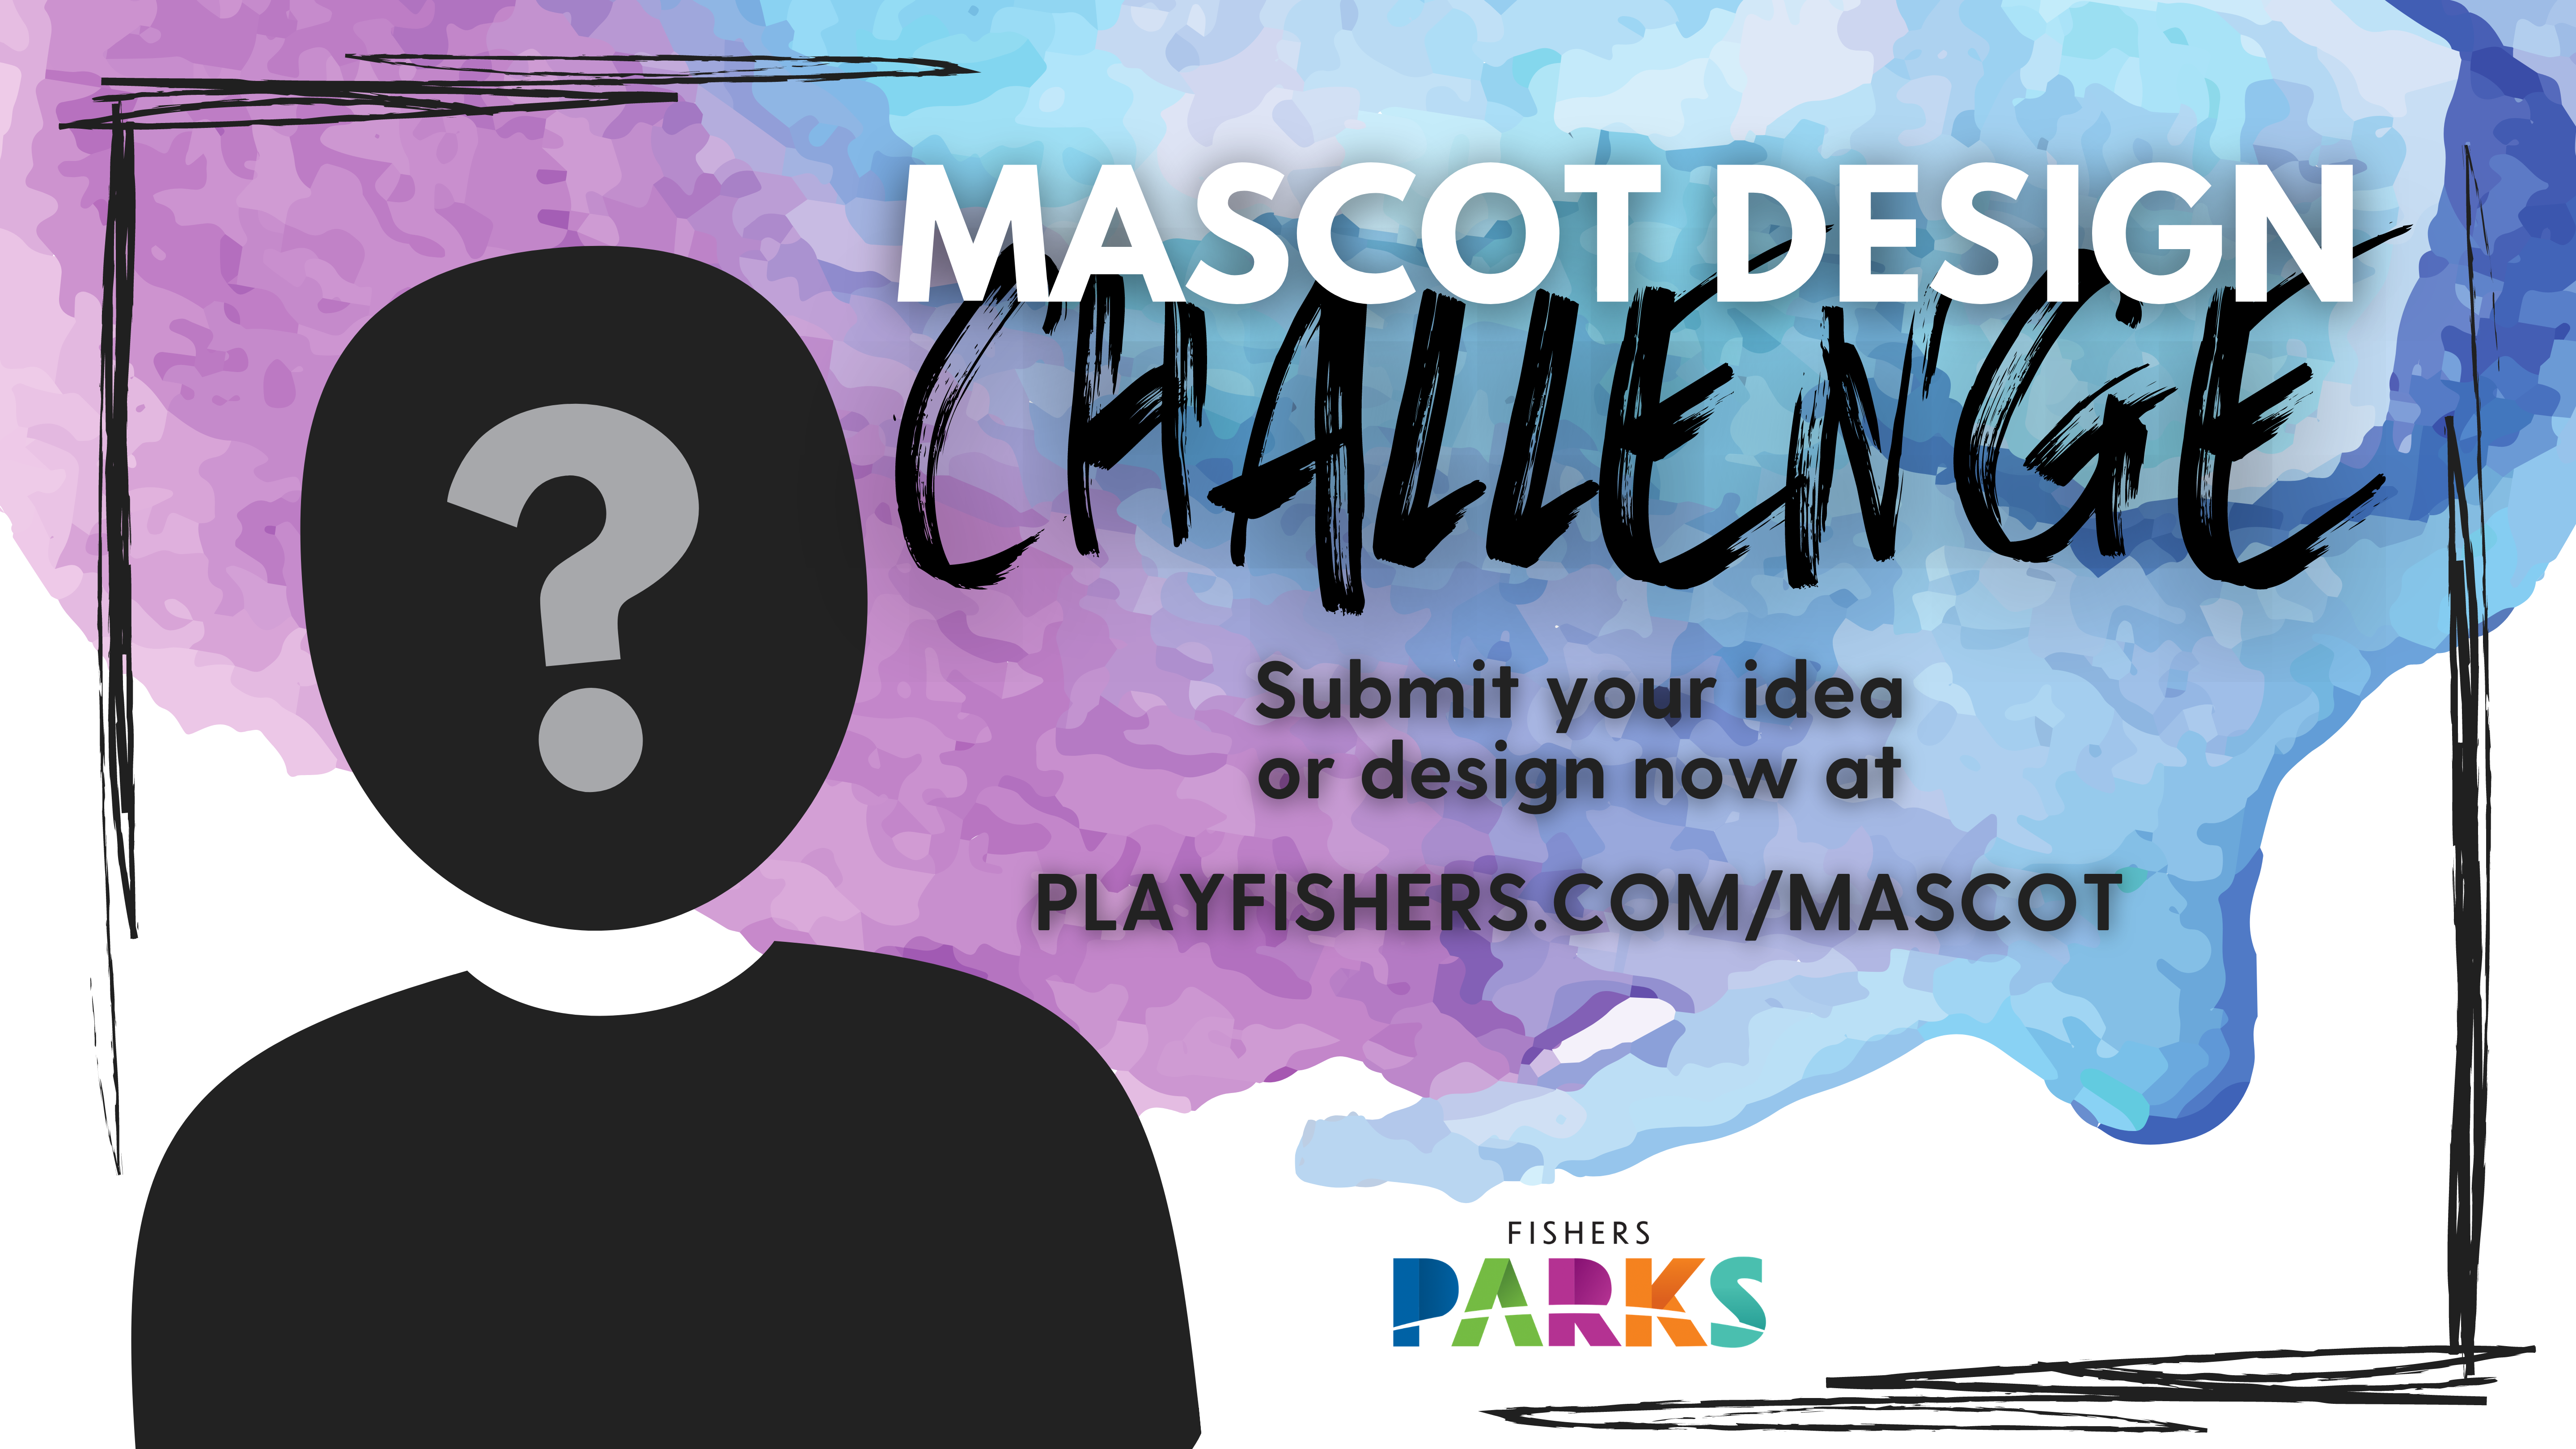 mascot design challenge submit your idea or design now at playfishers.com/mascor